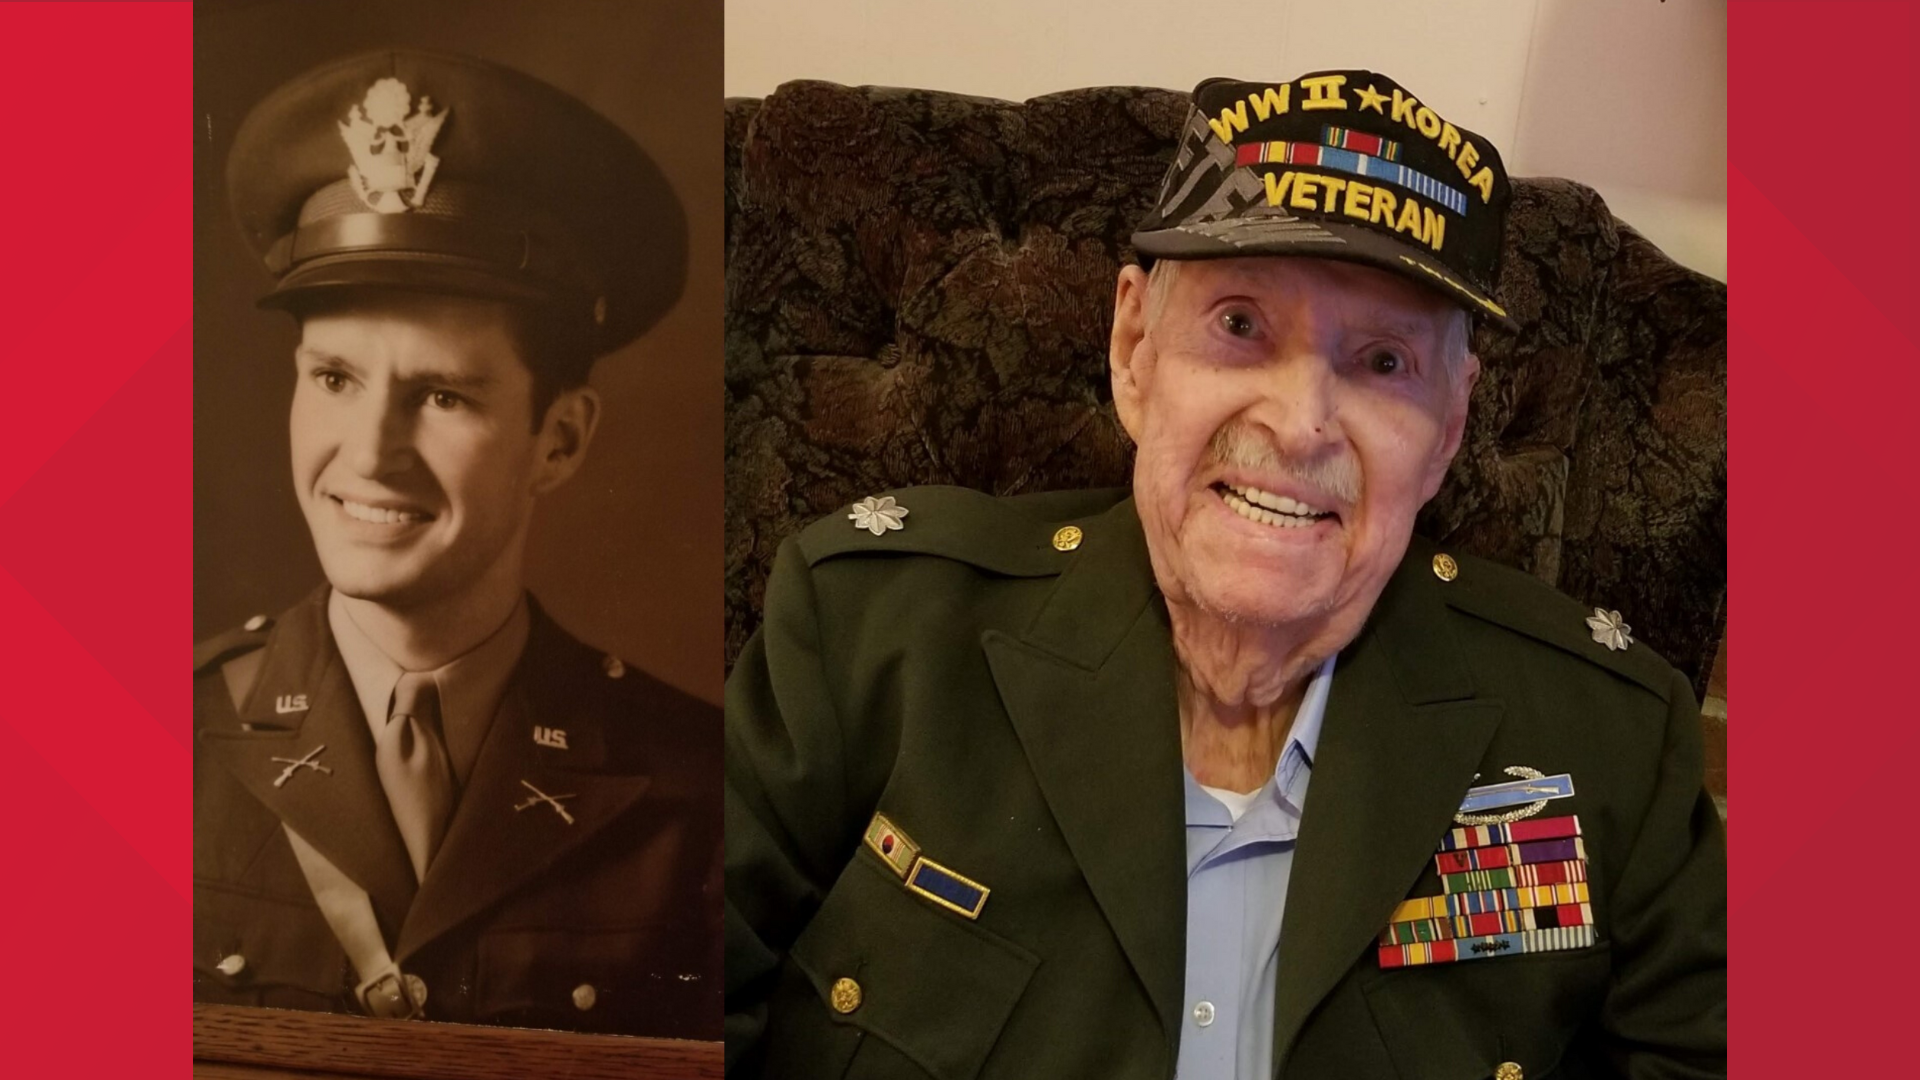 The Army veteran served in both World War II and the Korean War. Saturday, he hit a milestone: 100 years of age.